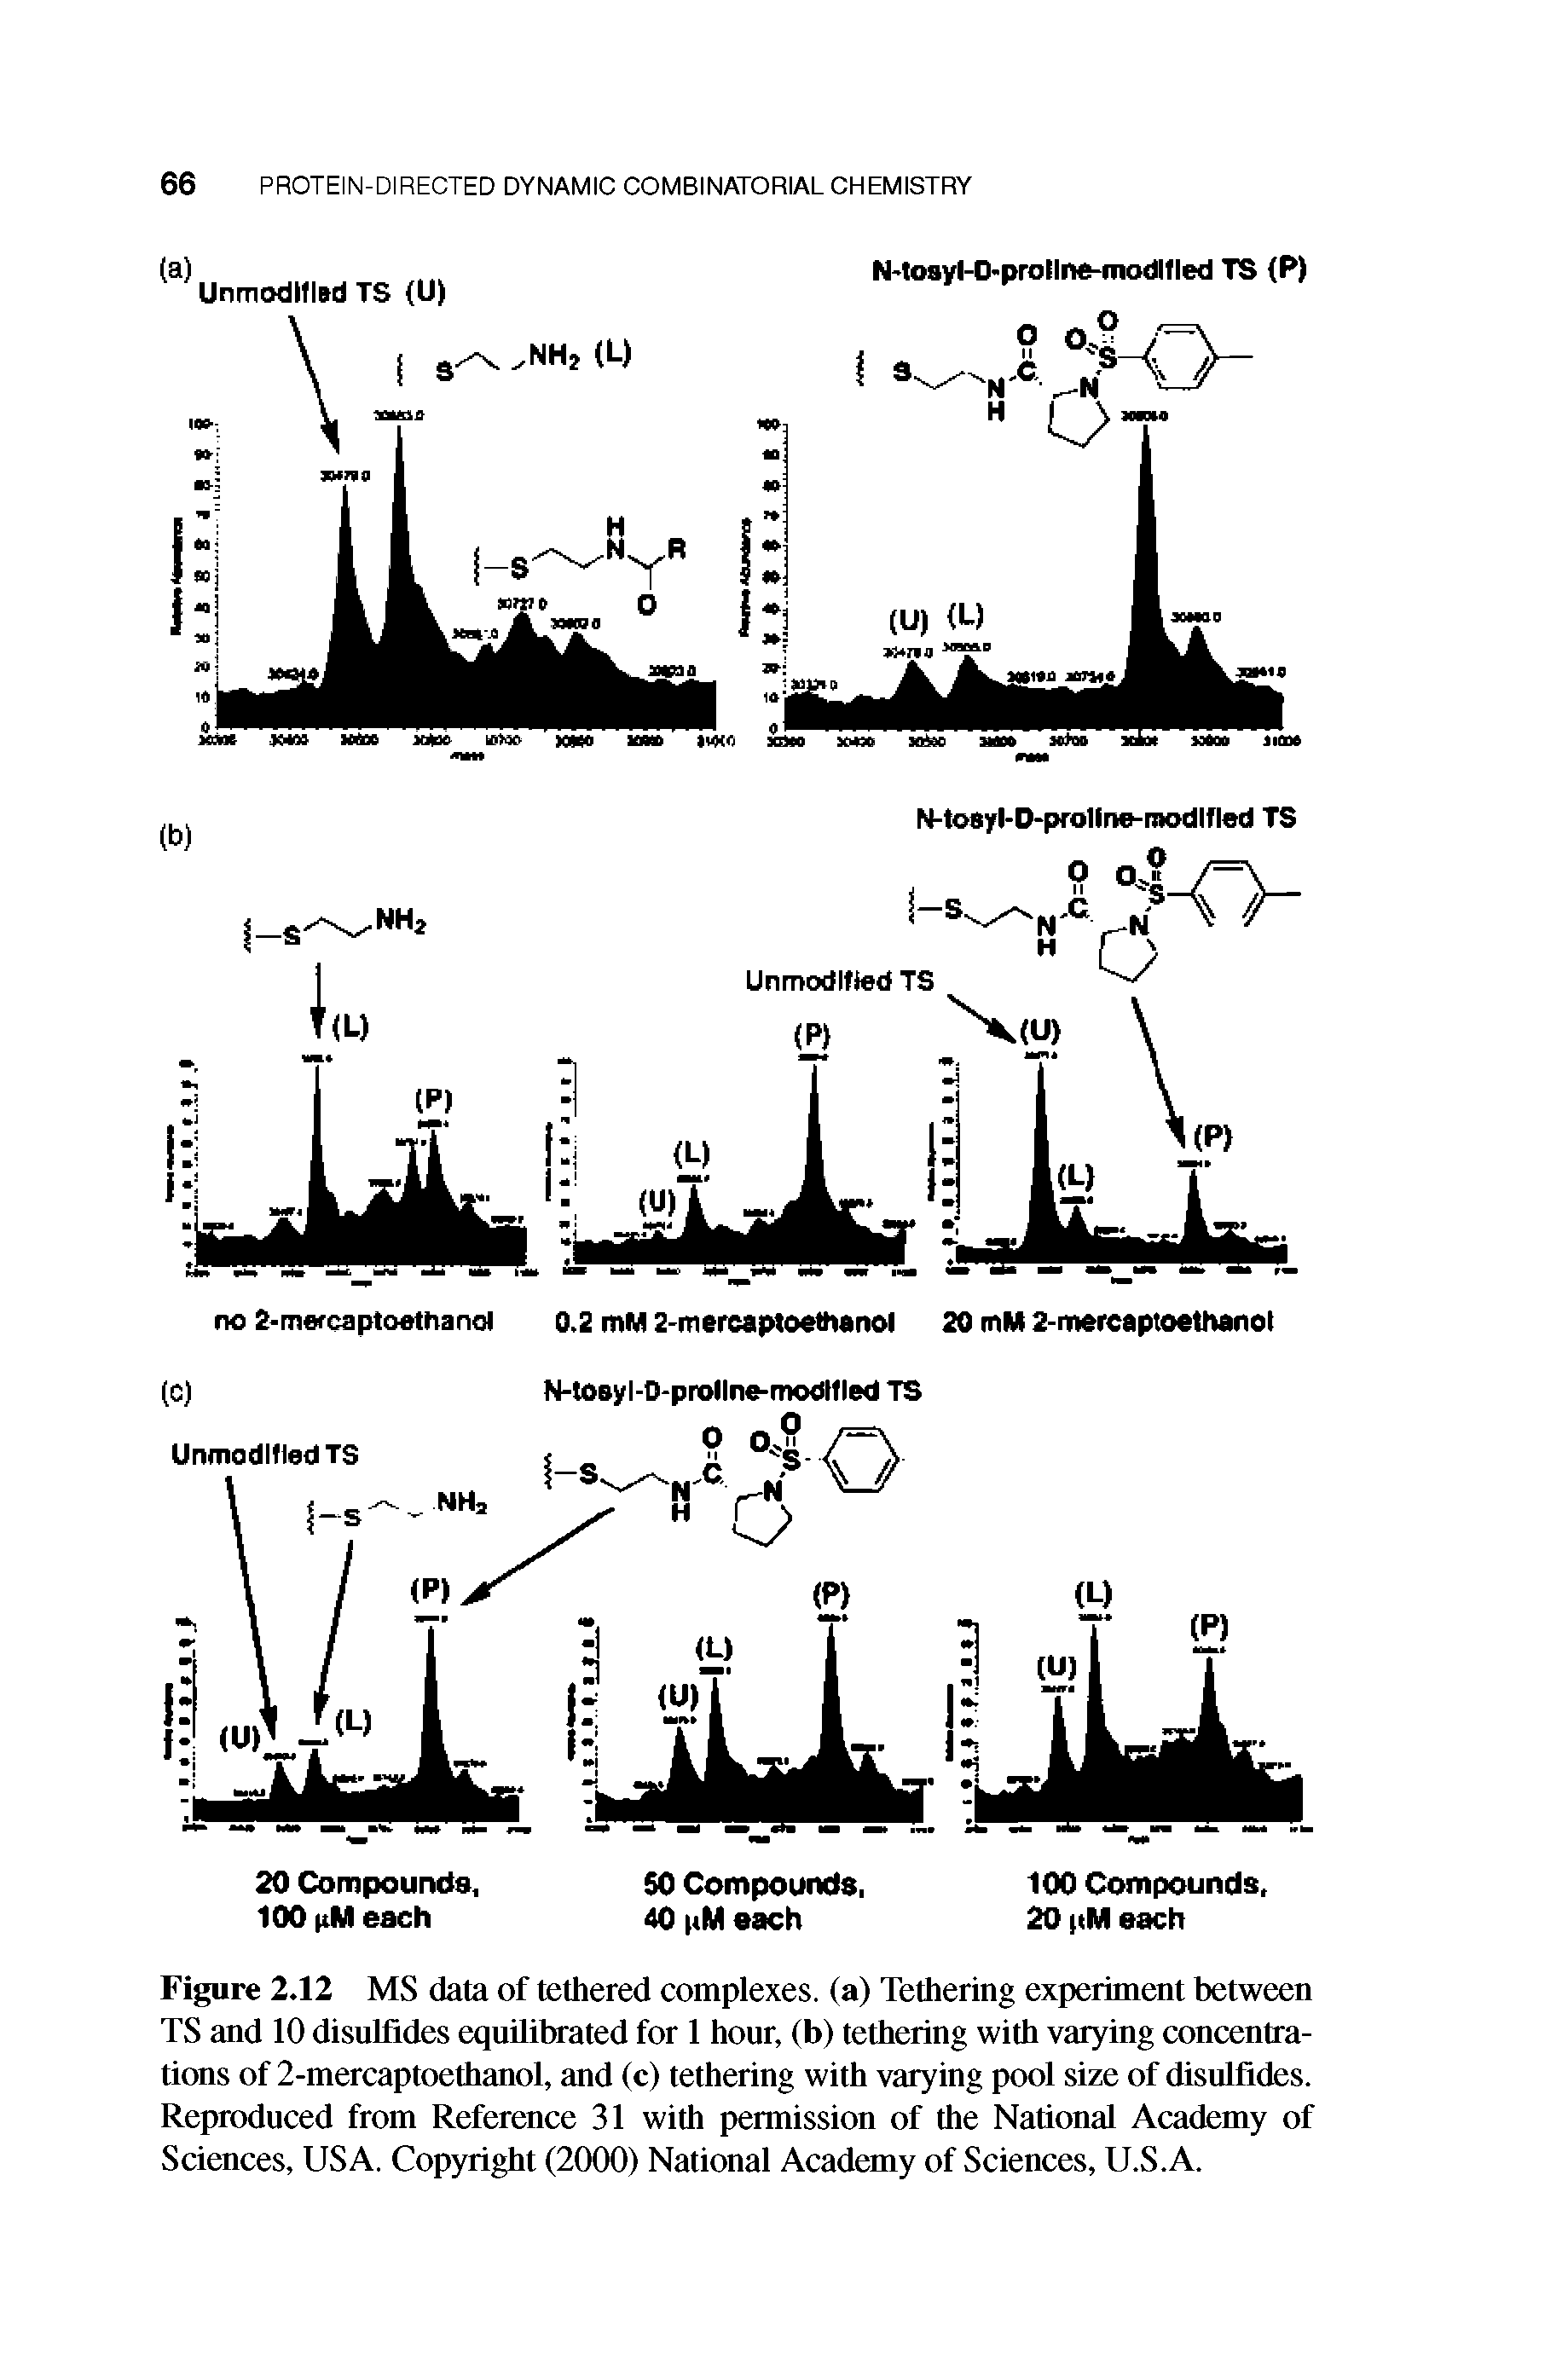 Figure 2.12 MS data of tethered complexes, (a) Tethering experiment between TS and 10 disulfides equilibrated for 1 hour, (b) tethering with varying concentrations of 2-mercaptoethanol, and (c) tethering with varying pool size of disulfides. Reproduced from Reference 31 with permission of the National Academy of Sciences, USA. Copyright (2000) National Academy of Sciences, U.S.A.